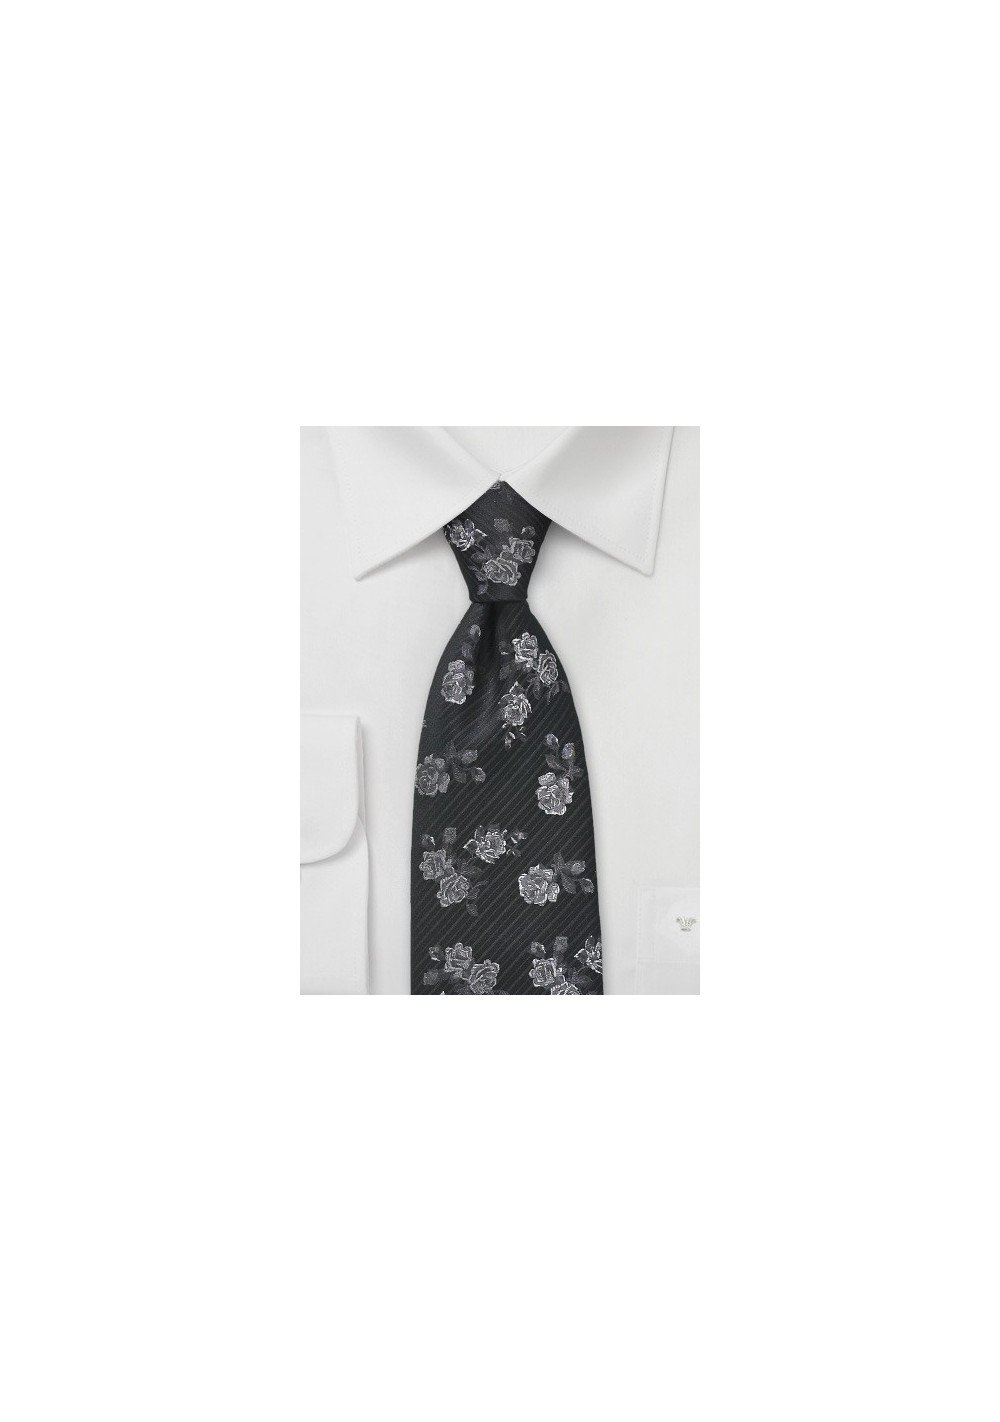 Retro Floral Tie in Black and Charcoal